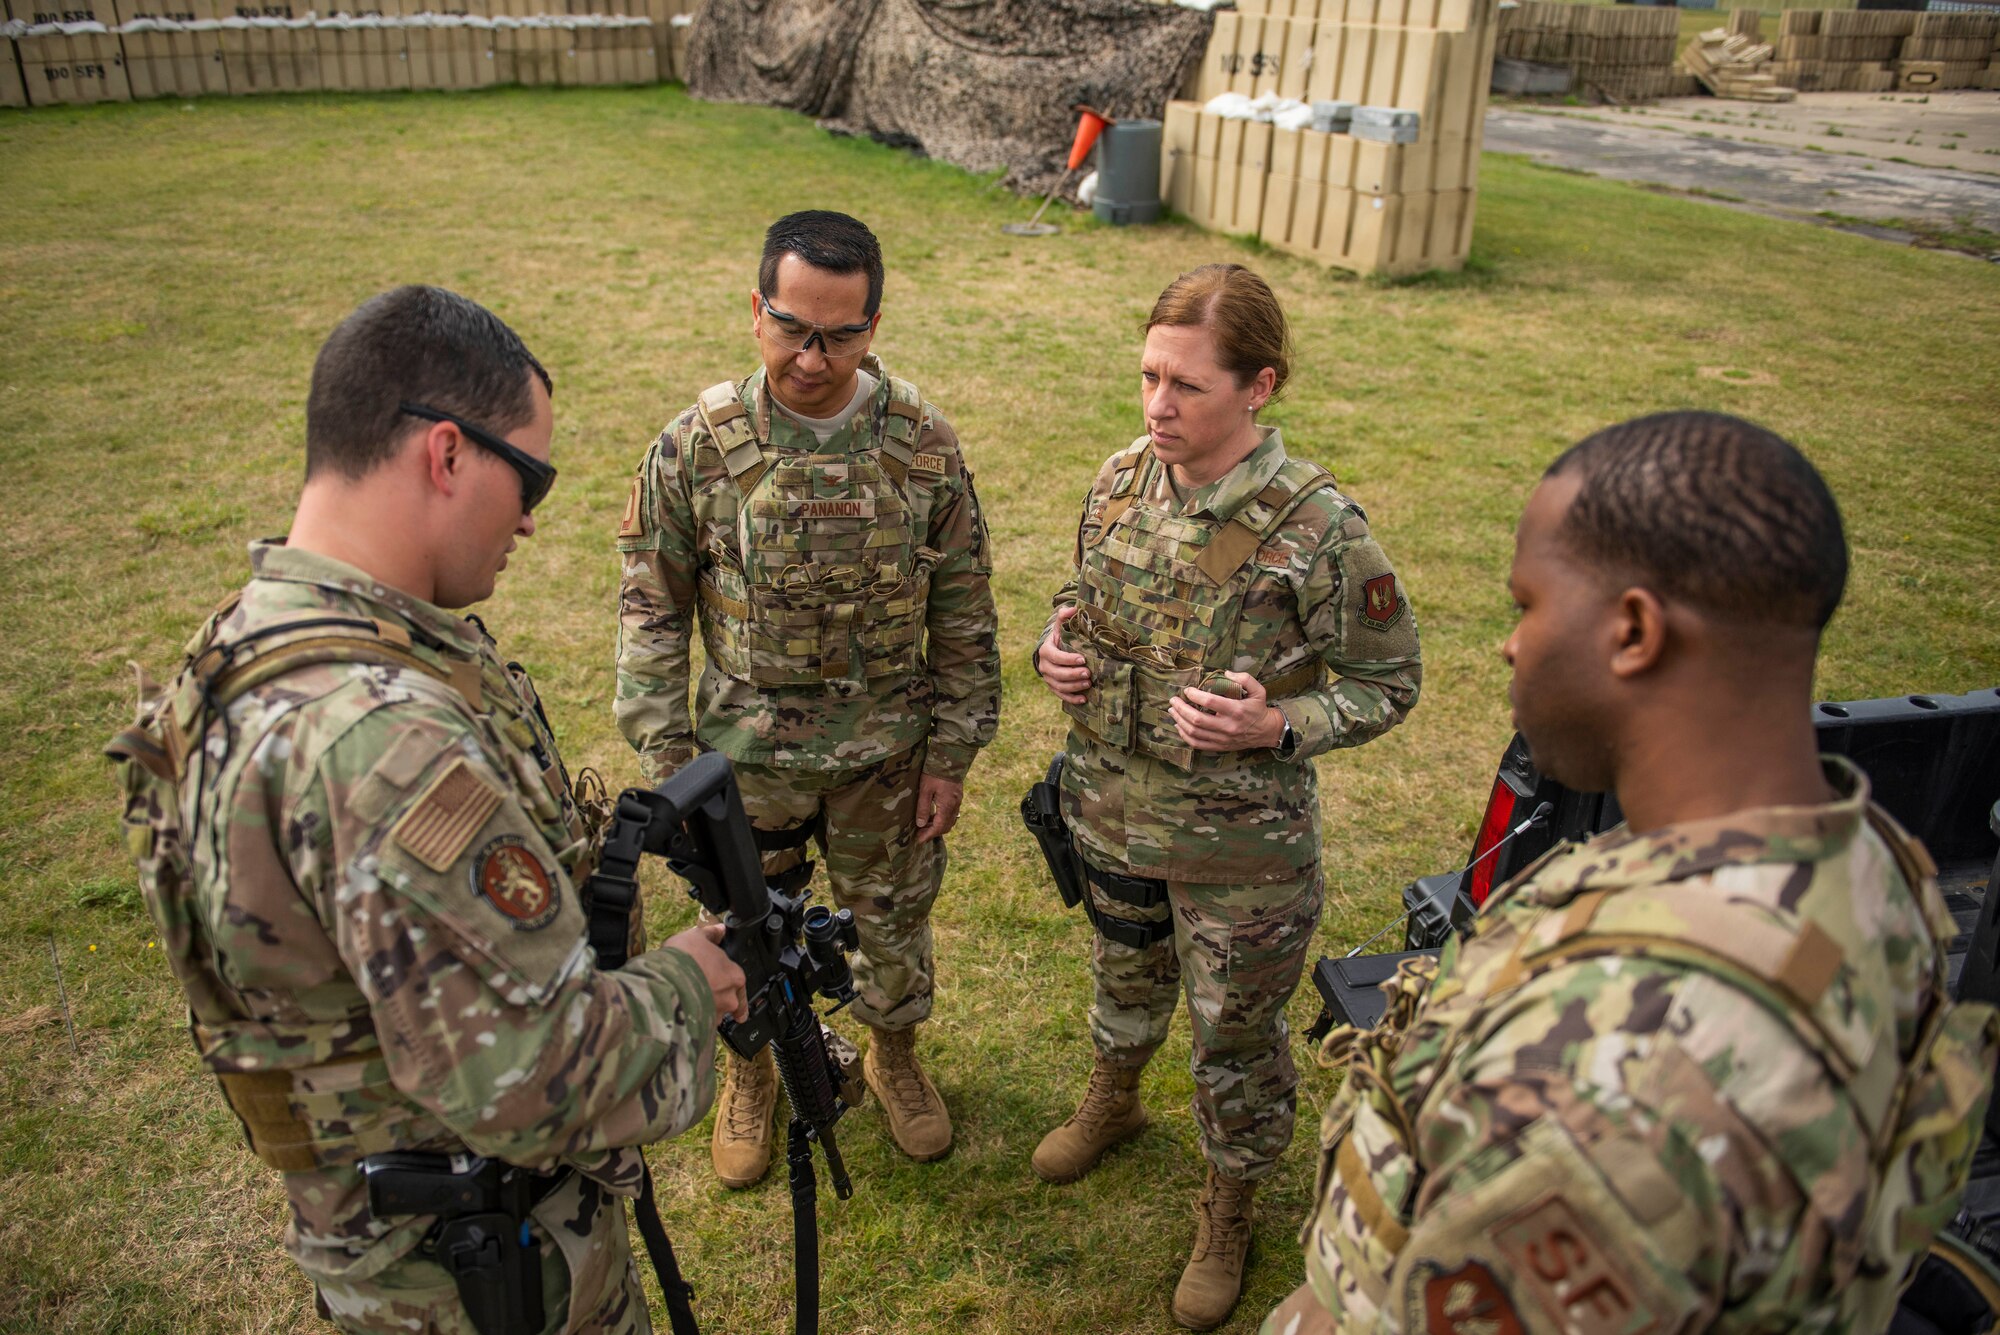 Staff Sgt. Brandon Russell, 100th Security Forces Squadron training instructor, left, shows Col. Troy Pananon, second left, 100th Air Refueling Wing commander, and Chief Master Sgt. Kathi Glascock, 100th ARW command chief, how to safely operate an M4 Carbine during advance shoot, move and communicate training at RAF Mildenhall, England, Aug. 30, 2019. The purpose of the training was for the defenders to demonstrate their advanced combat skills for the commander and command Chief. (U.S. Air Force photo by Senior Airman Luke Milano)